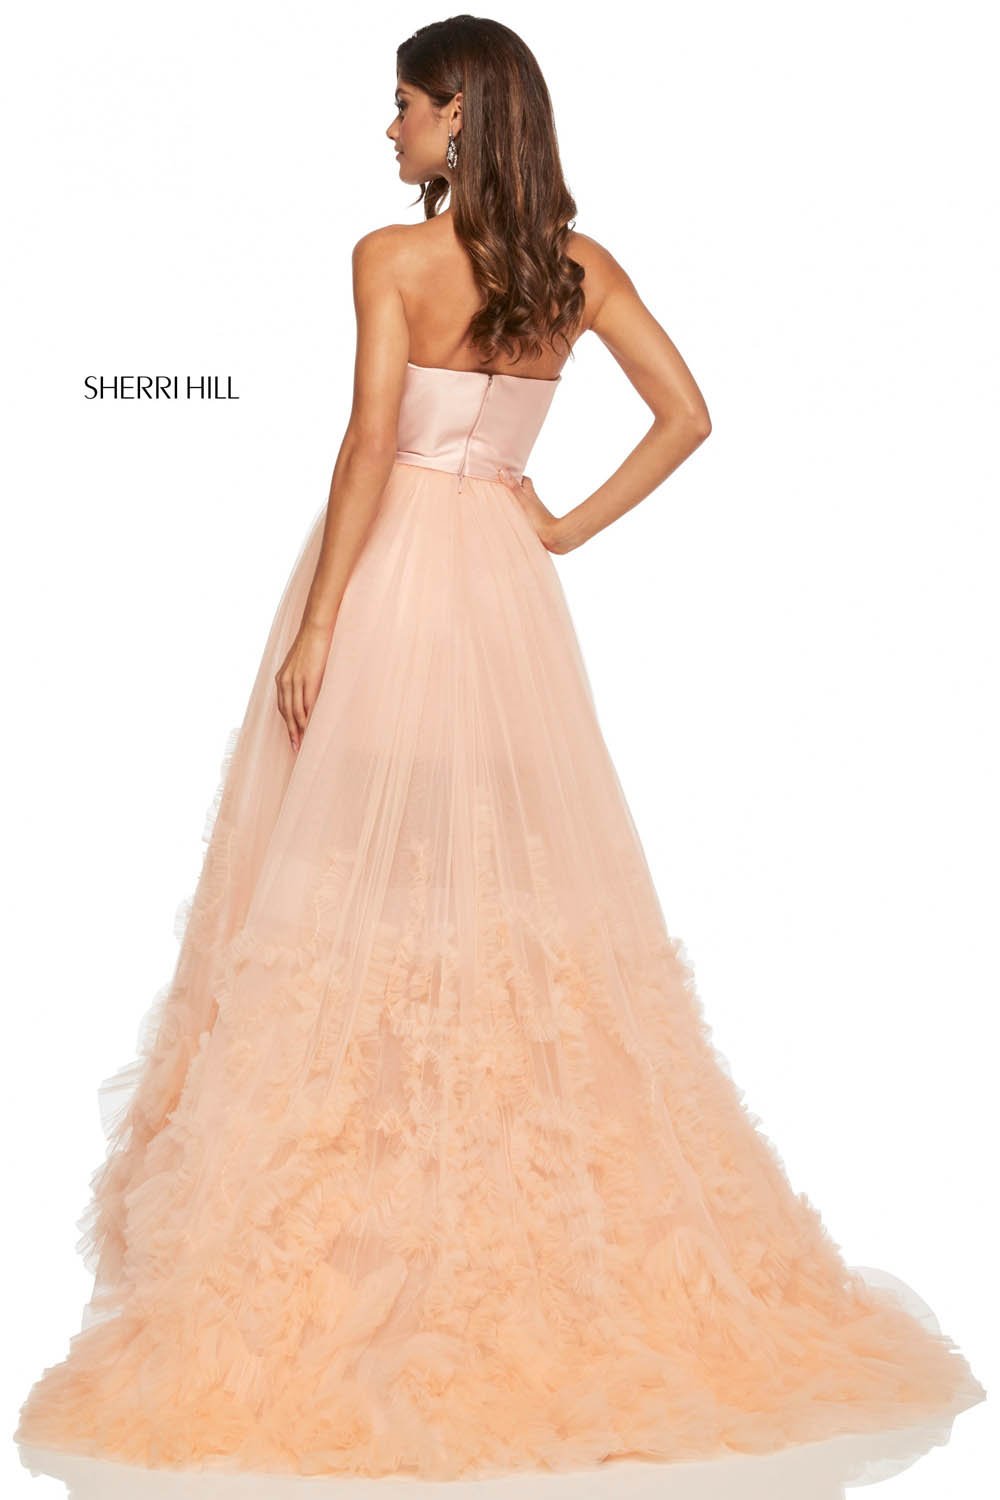 Sherri Hill 52693 dress images in these colors: Blush, Black, Blue, Ivory, Red, Lilac.